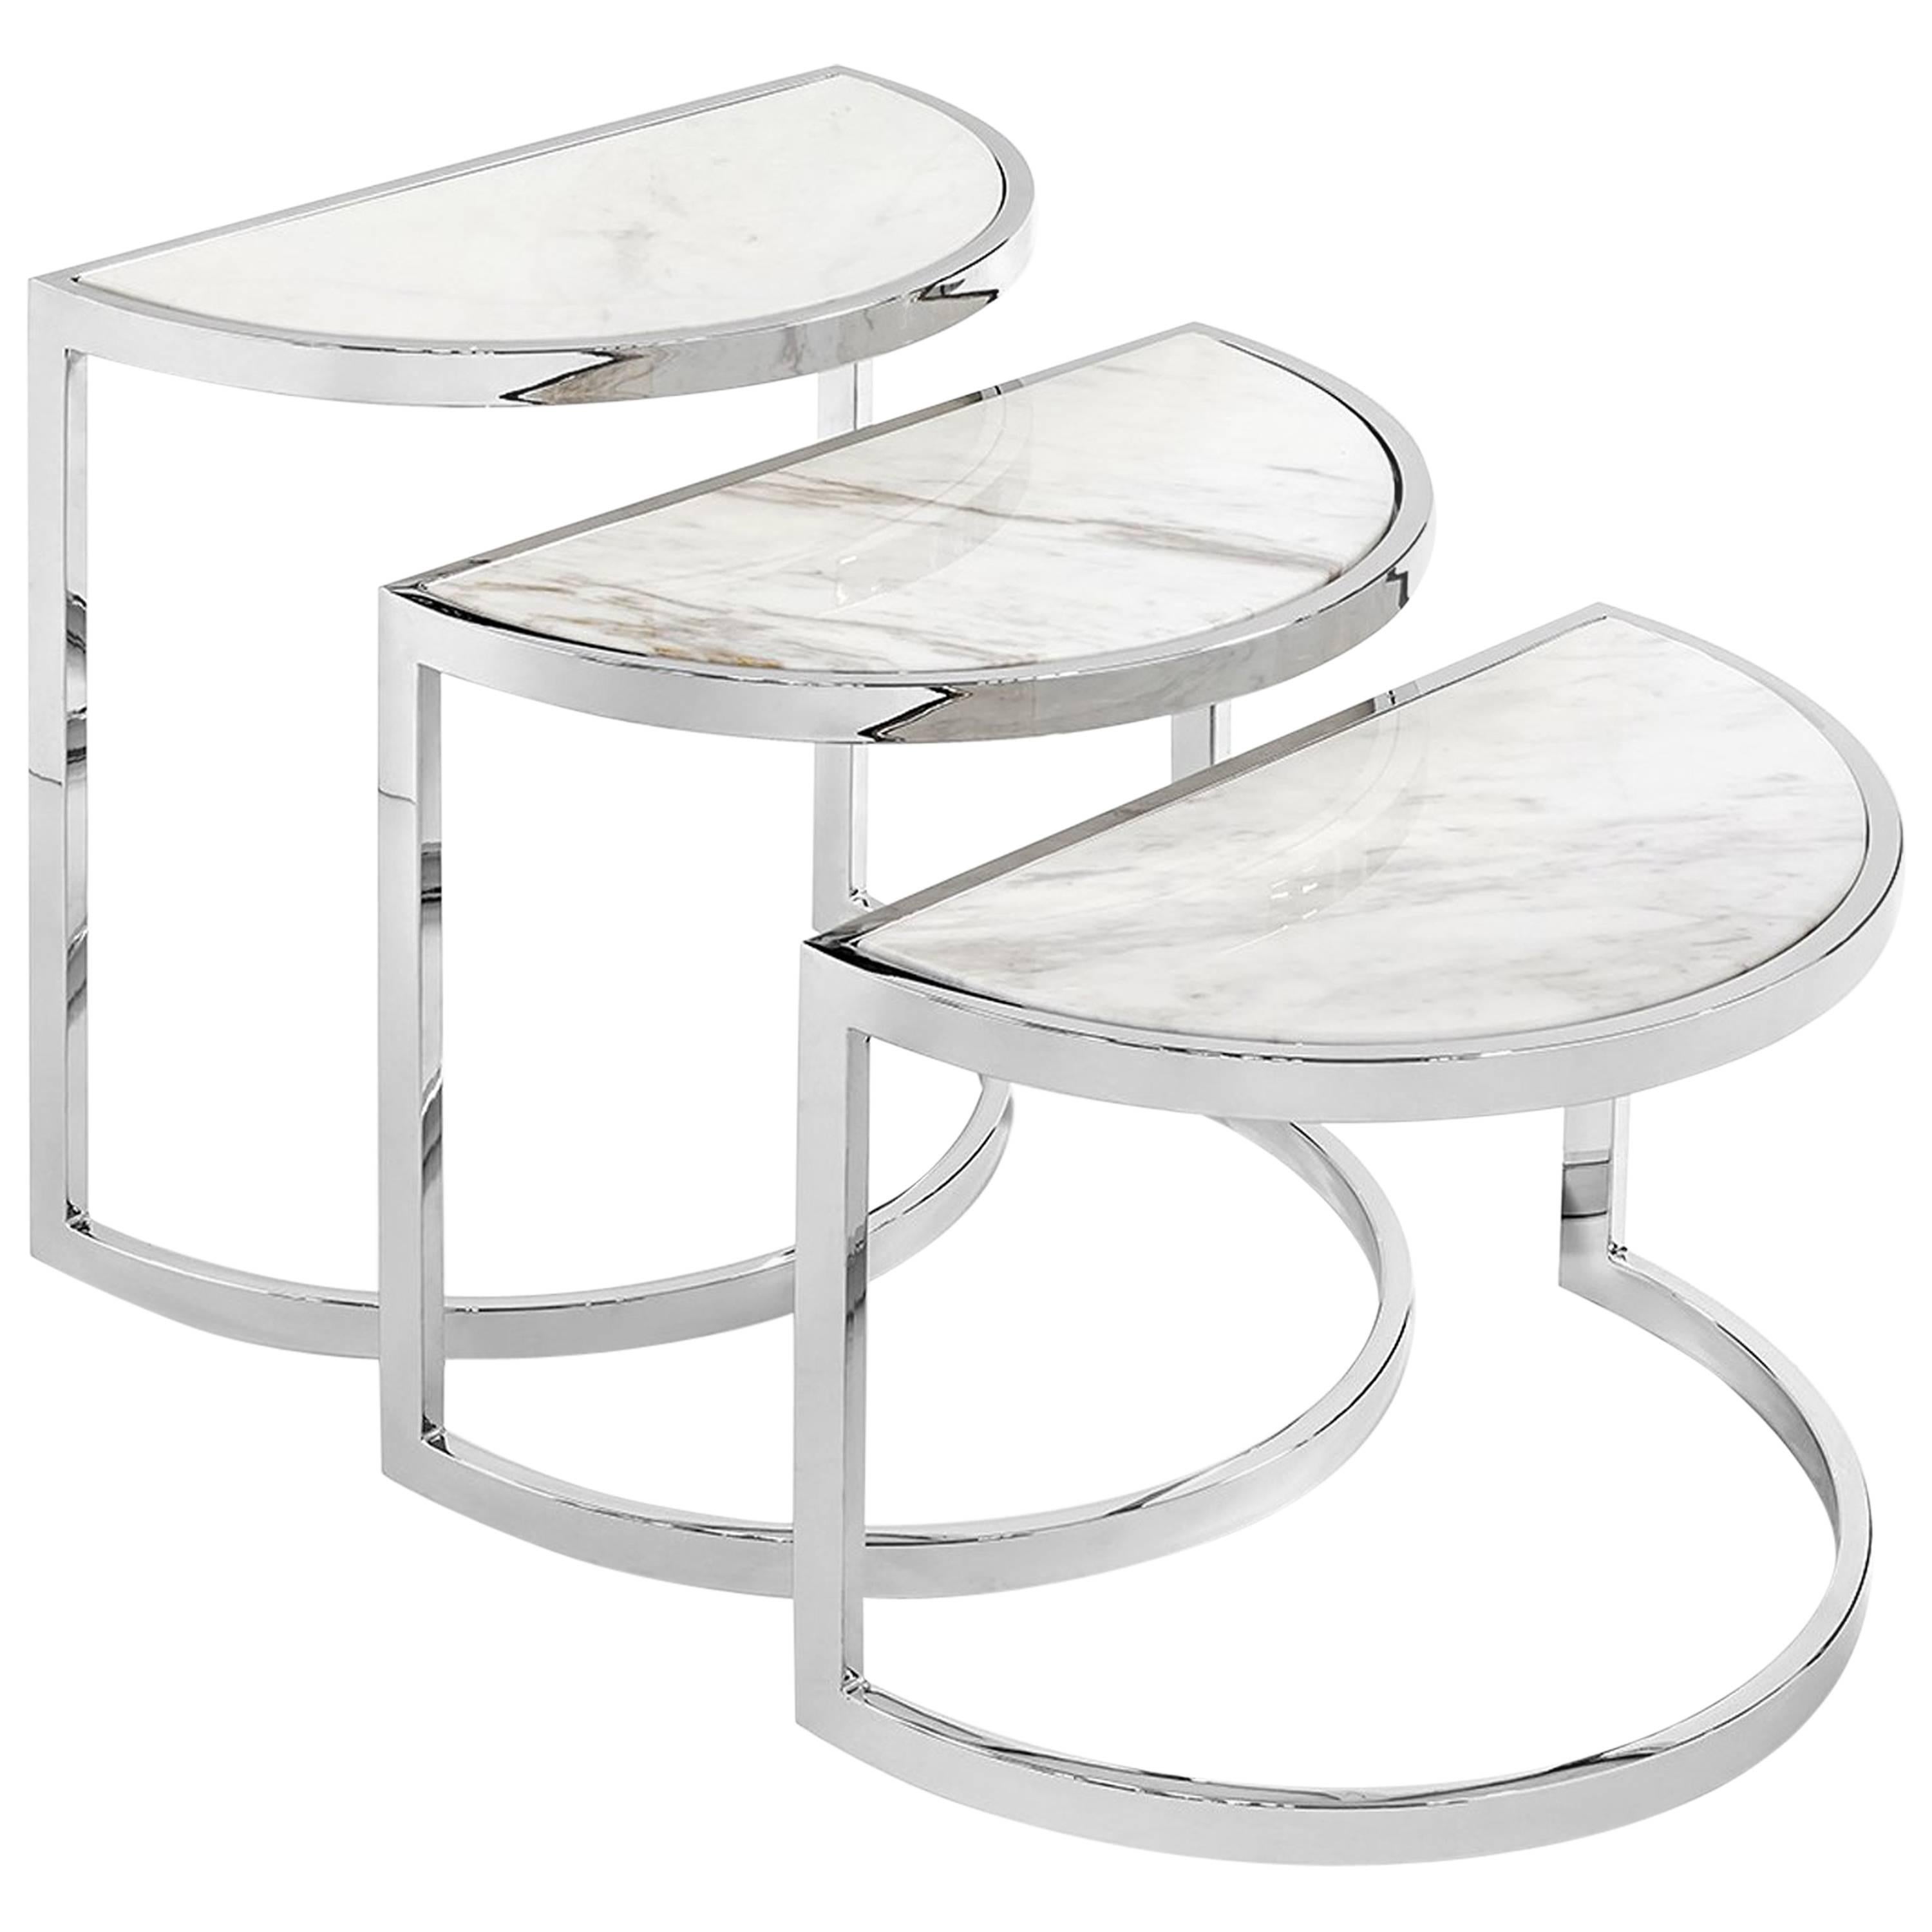 Half Moon Side Table Set of Three with White Marble Top or Glass Top